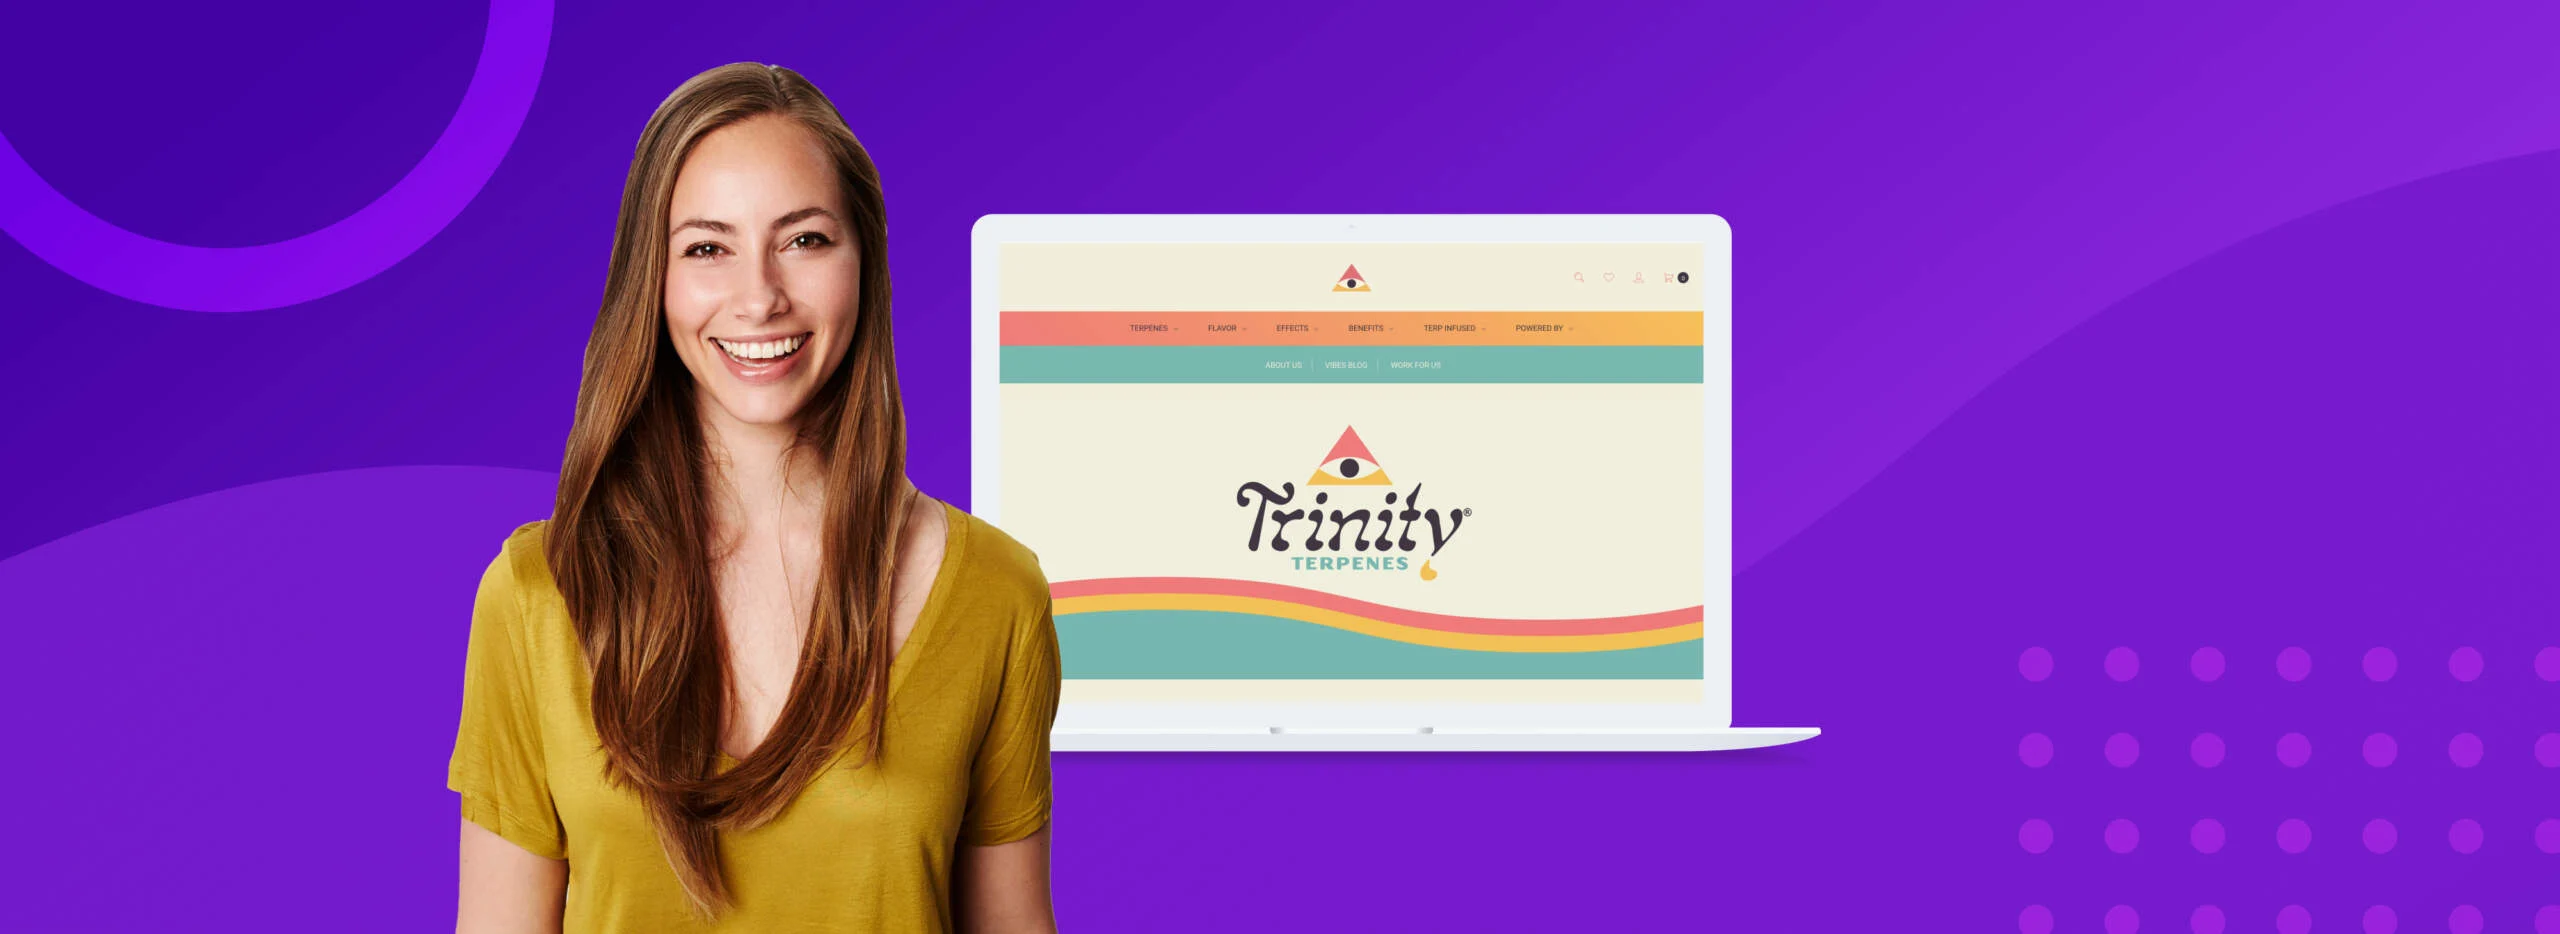 Trinity Terpenes Finds Good Vibes on BigCommerce